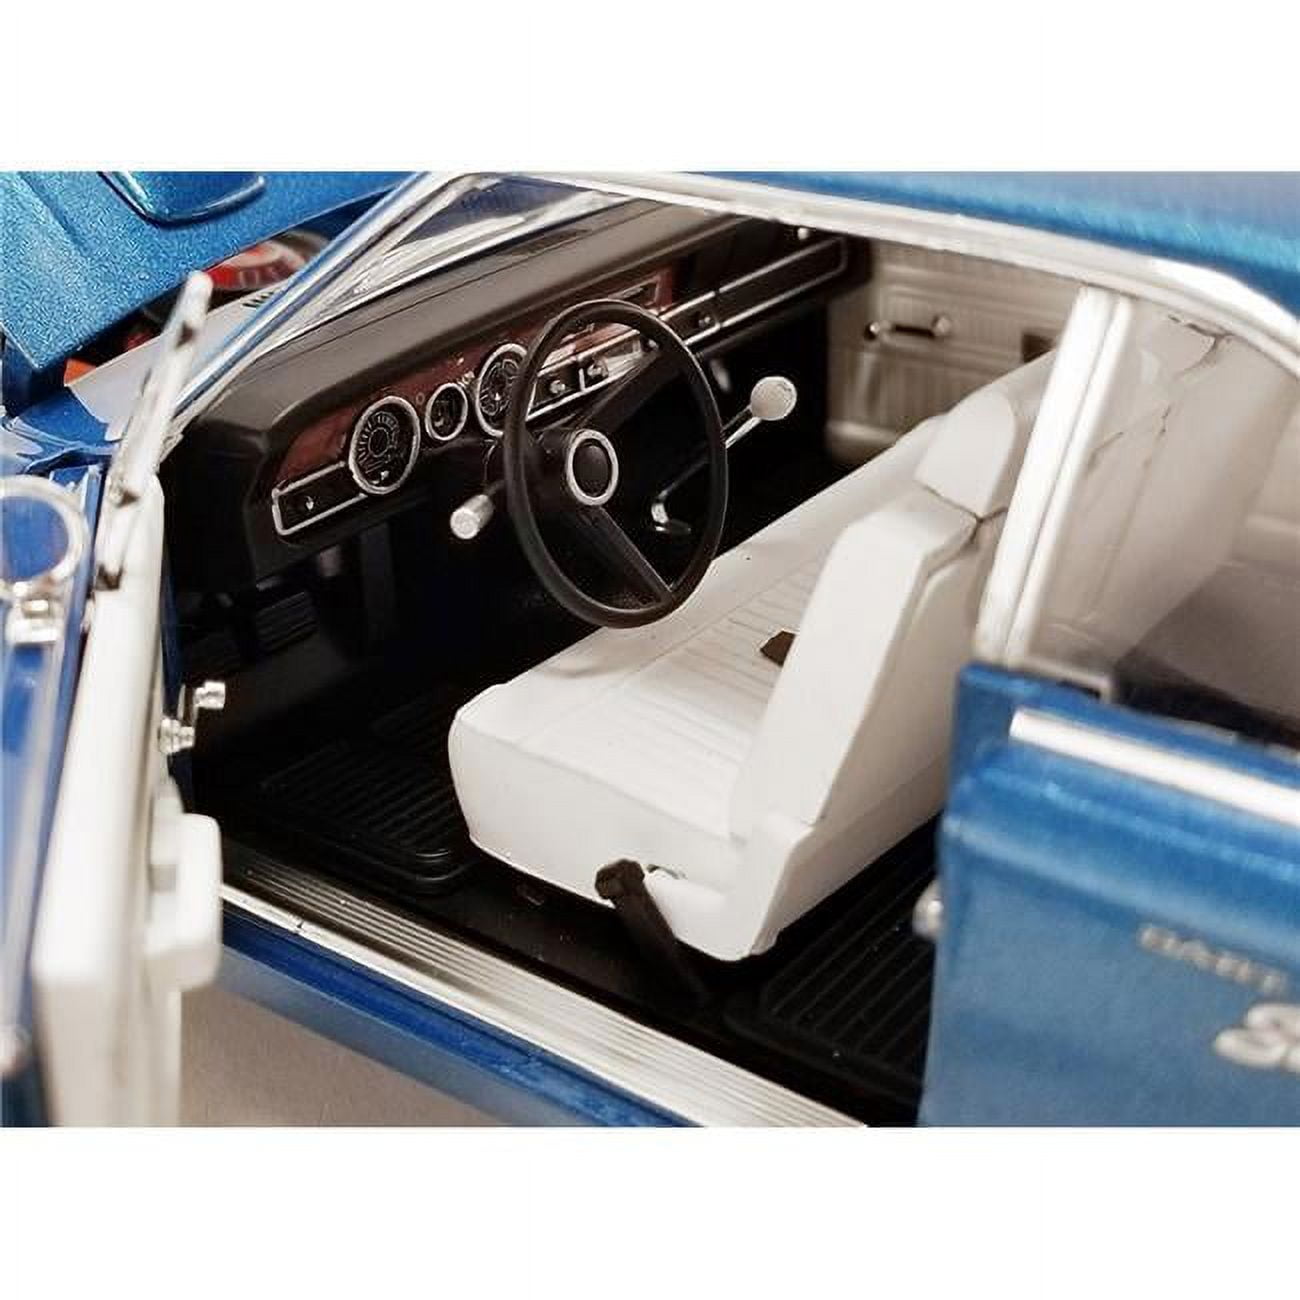 Picture of Acme A1806409 1970 Dodge Dart Swinger Interior Limited Edition 1-18 Diecast Model Car&#44; Blue Metallic & White